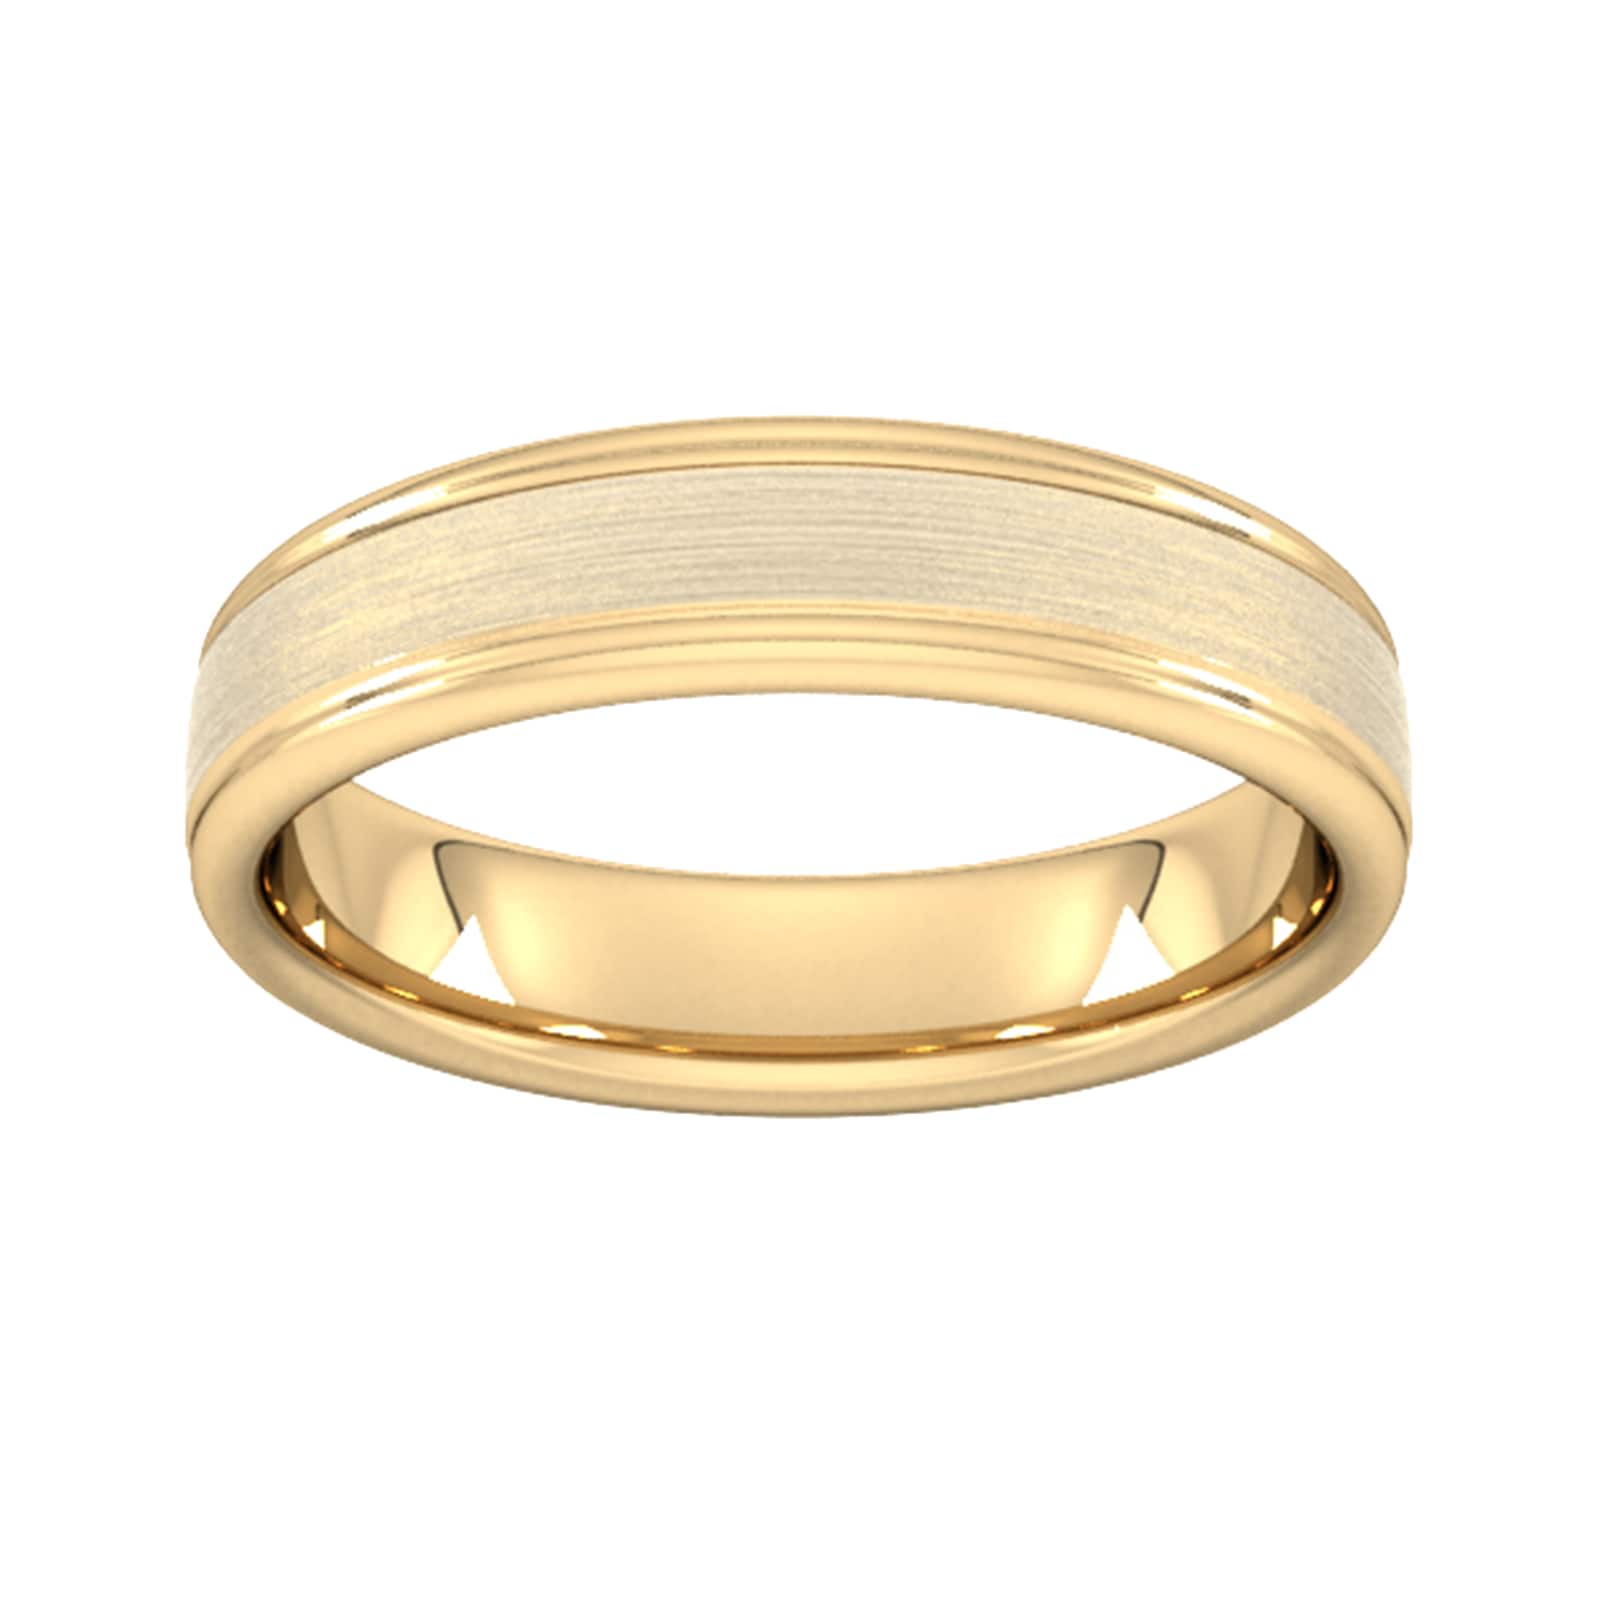 5mm Traditional Court Standard Matt Centre With Grooves Wedding Ring In 9 Carat Yellow Gold - Ring Size P